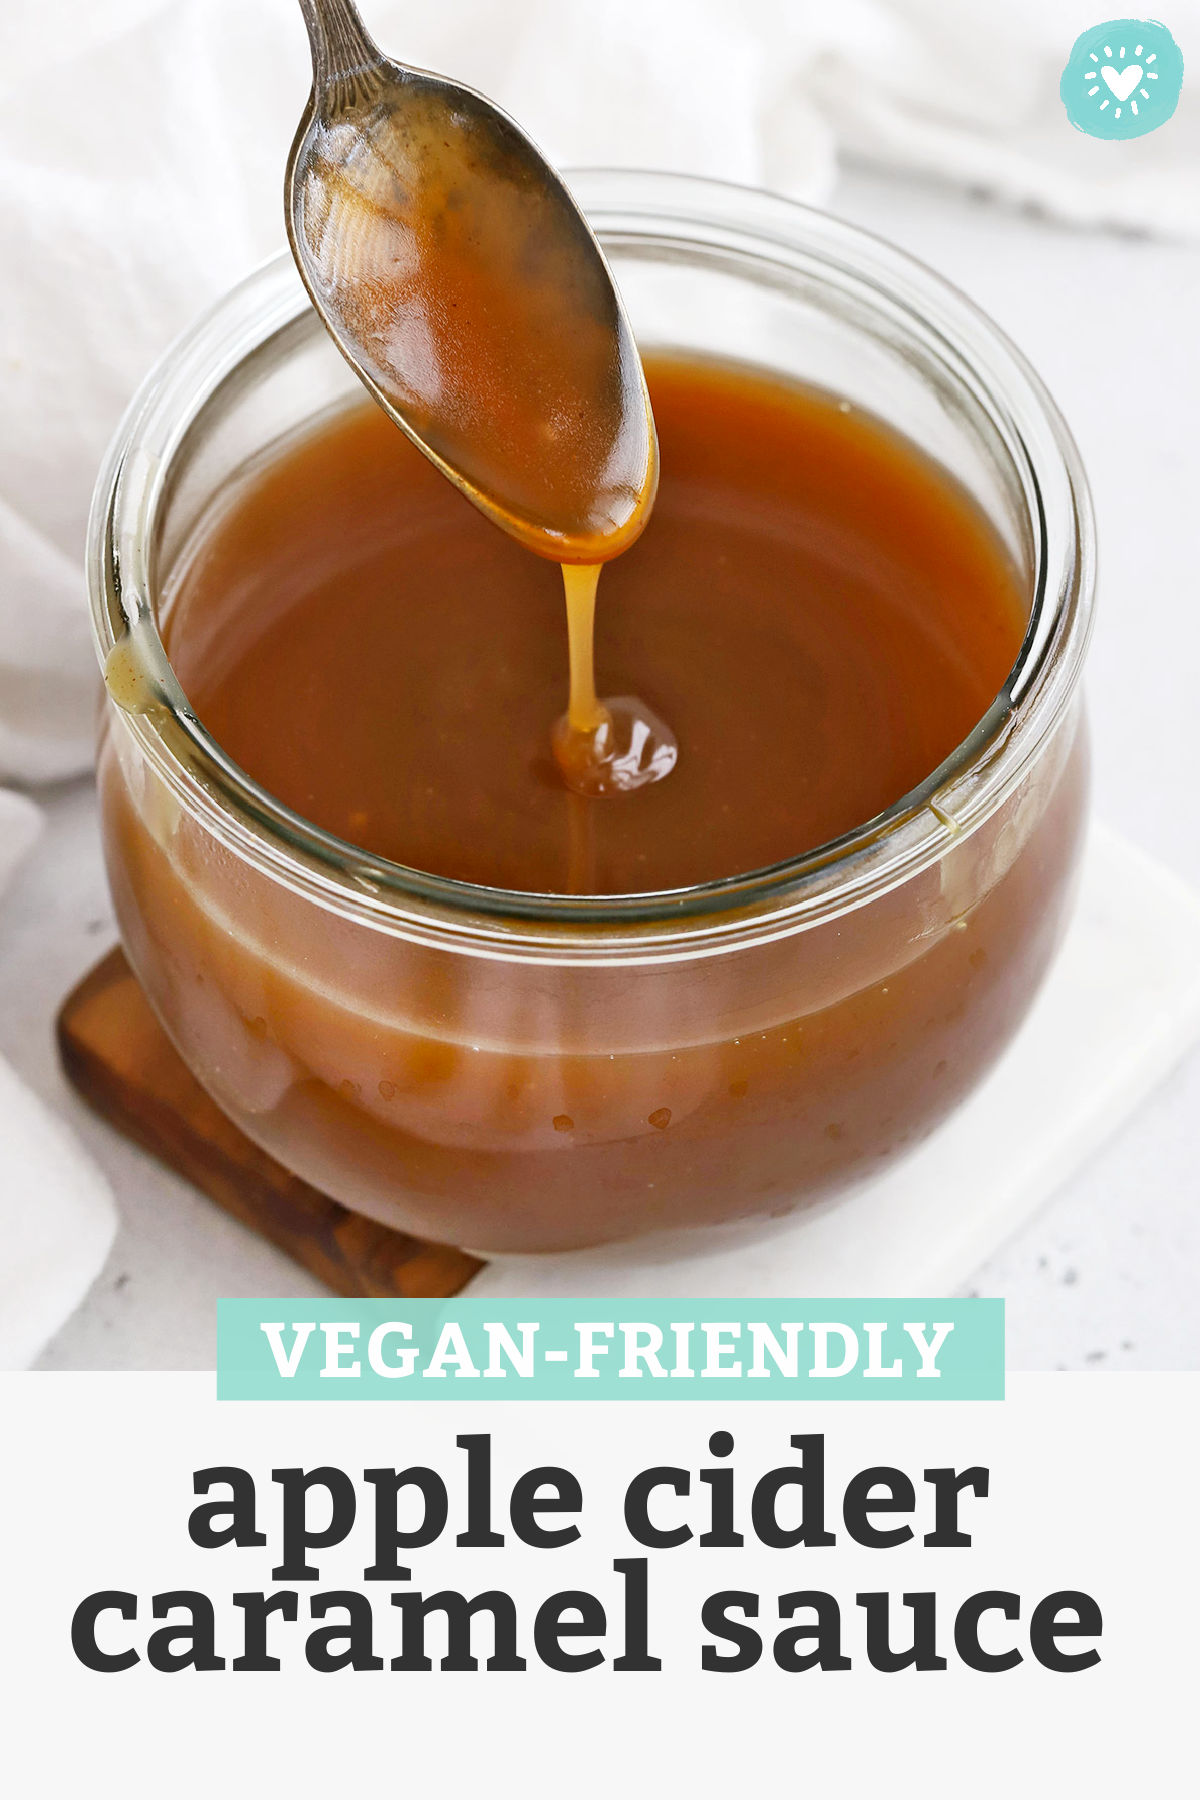 Spoon Drizzling Apple Cider Caramel Sauce into a jar with text overlay that reads "Vegan-Friendly Apple Cider Caramel Sauce"